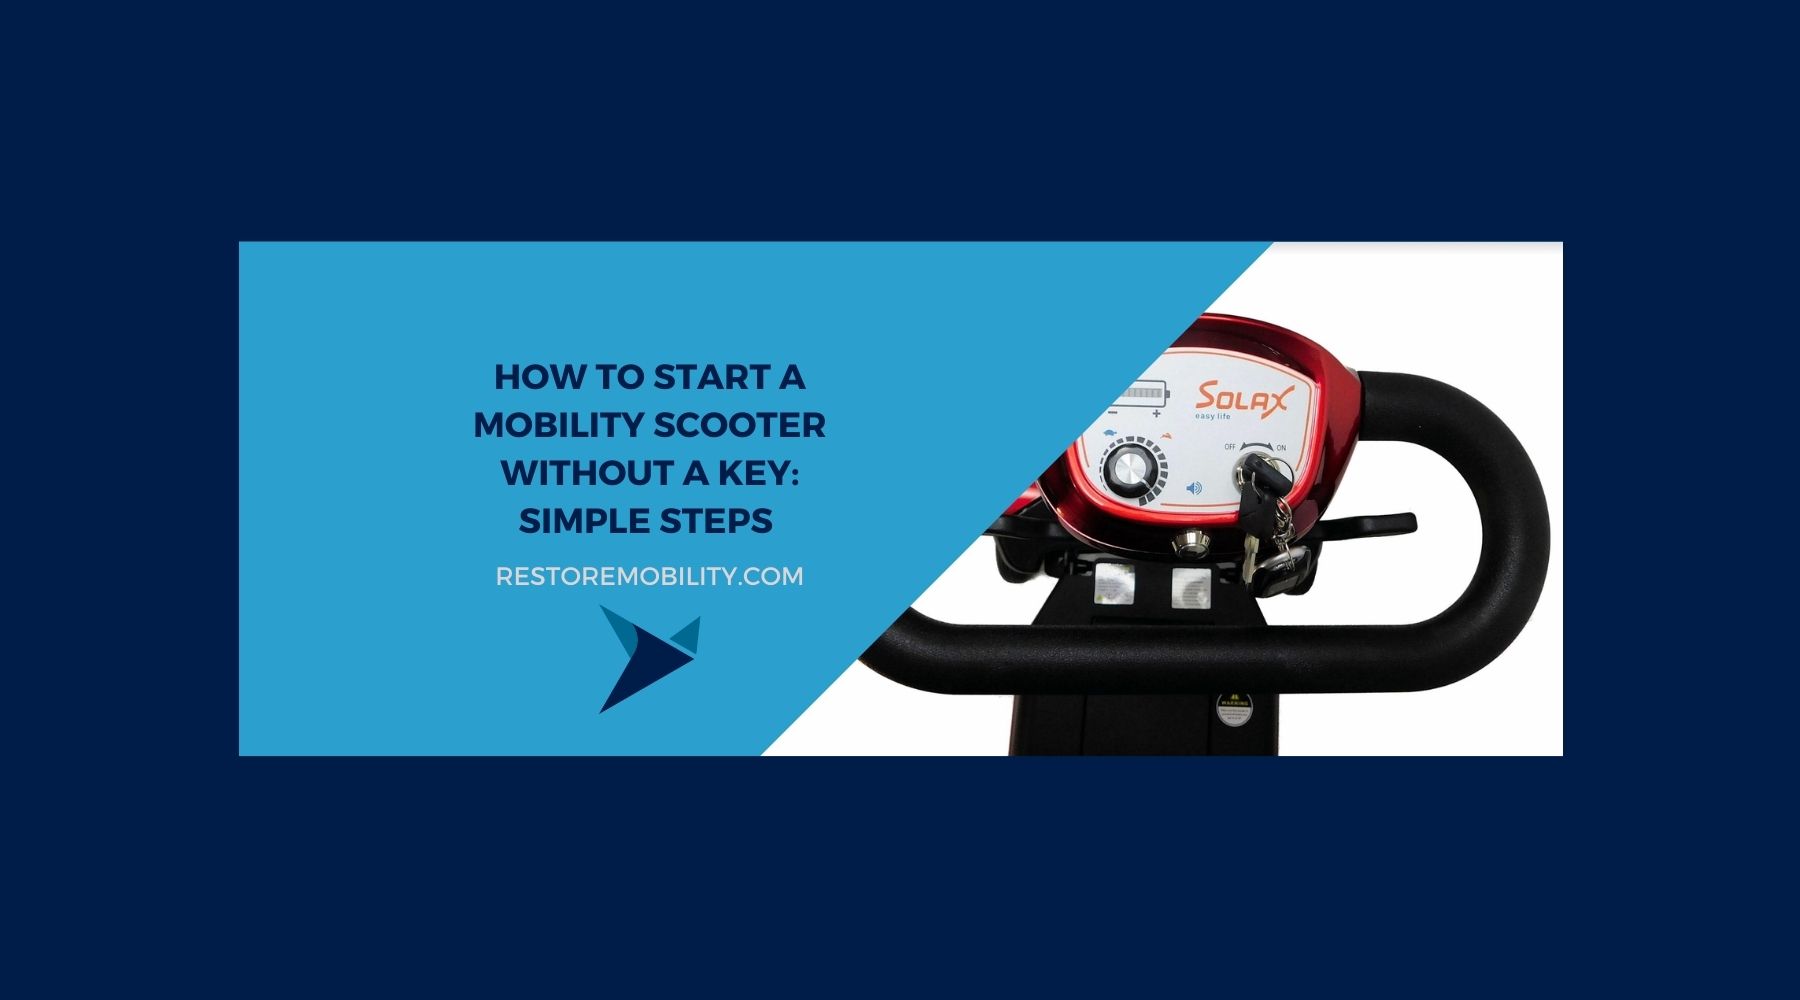 How to Start a Mobility Scooter Without a Key